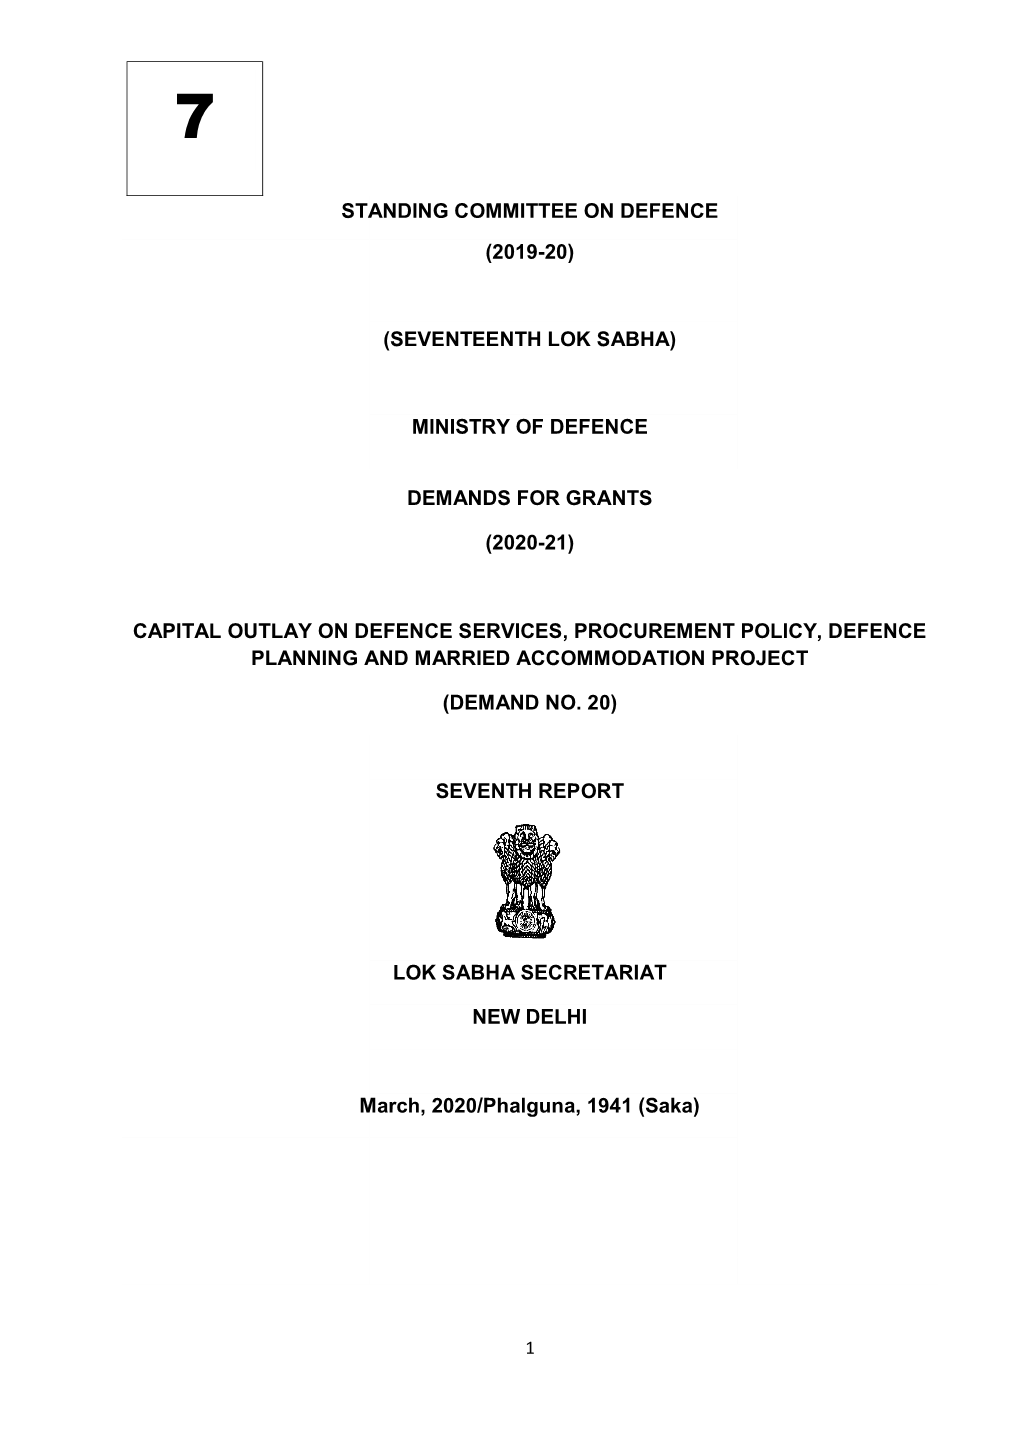 STANDING CO CAPITAL OUTLAY on DEFENCE SE PLANNING and MARR March STANDING COMMITTEE on DEFENCE (2019-20) (SEVENTEENTH LOK SABHA)